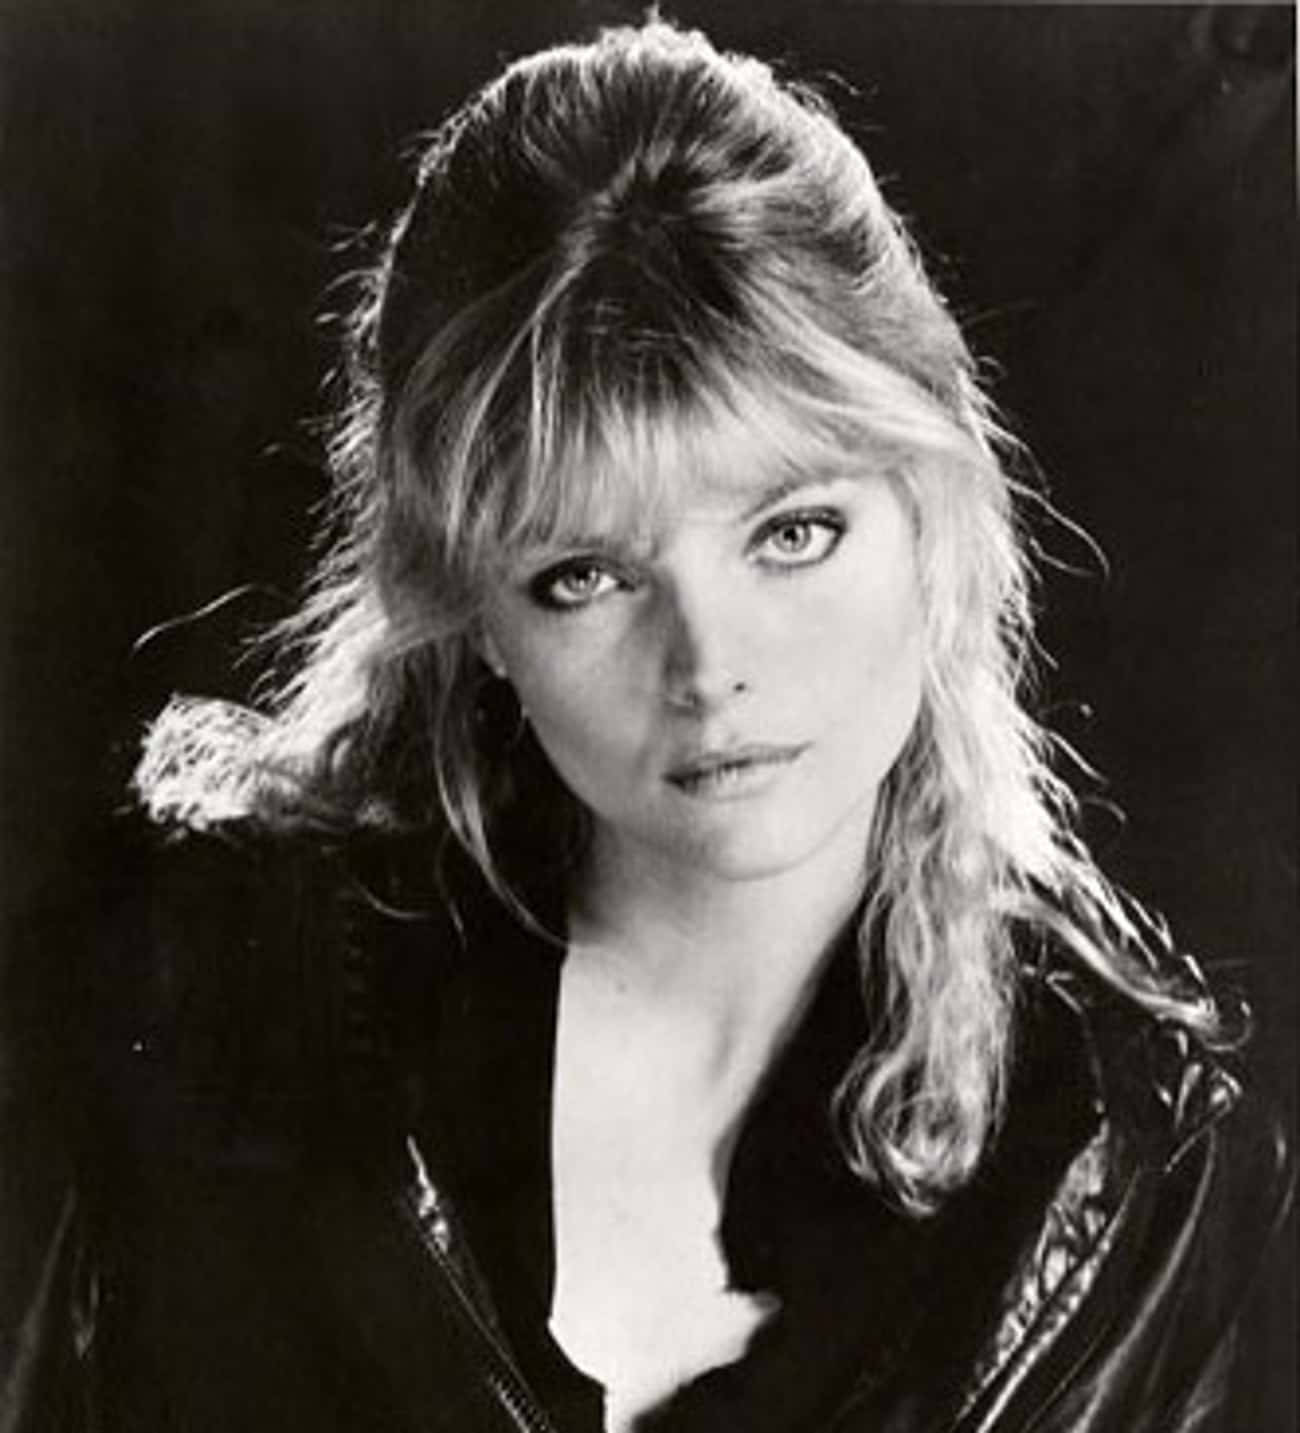 Young Michelle Pfeiffer in a Black Leather Zipup